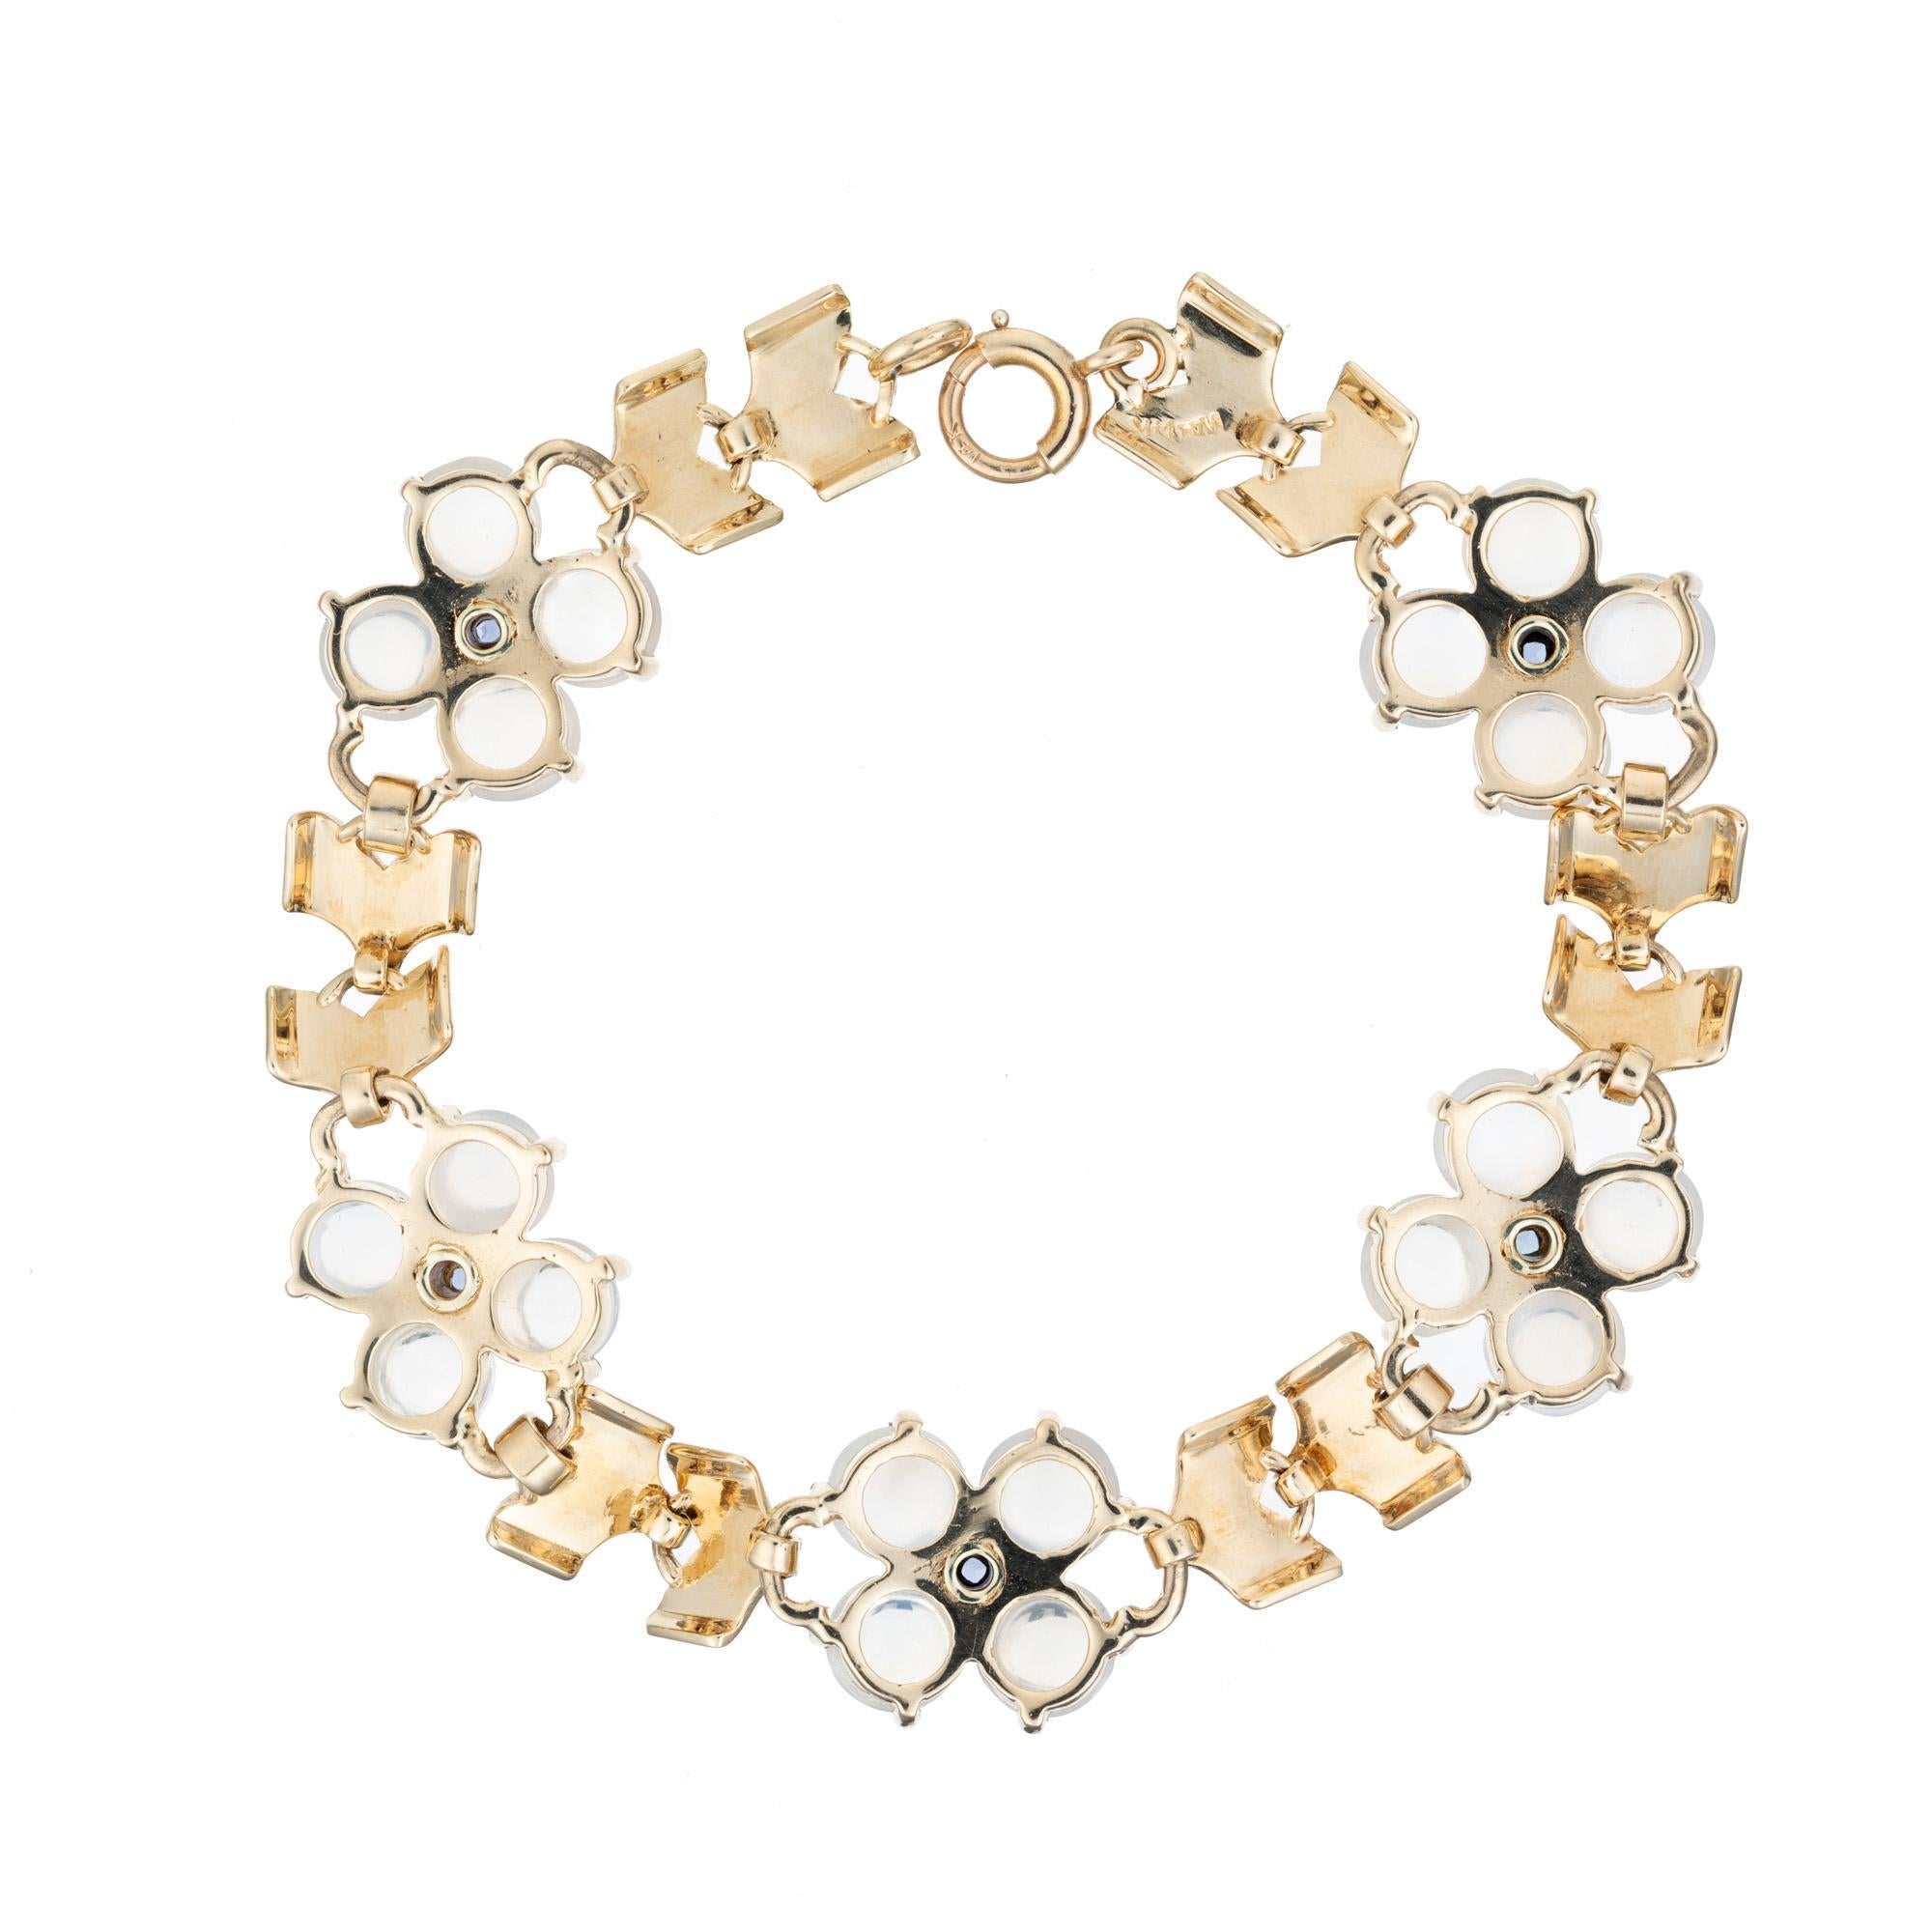 This 1940's Wefferling Berry designer bracelet features 20 stunning clear blue cabochon moonstones in five clusters of four with one square cut sapphire in the center of each cluster, with the sapphires totaling 1.11 carats. GIA certified the